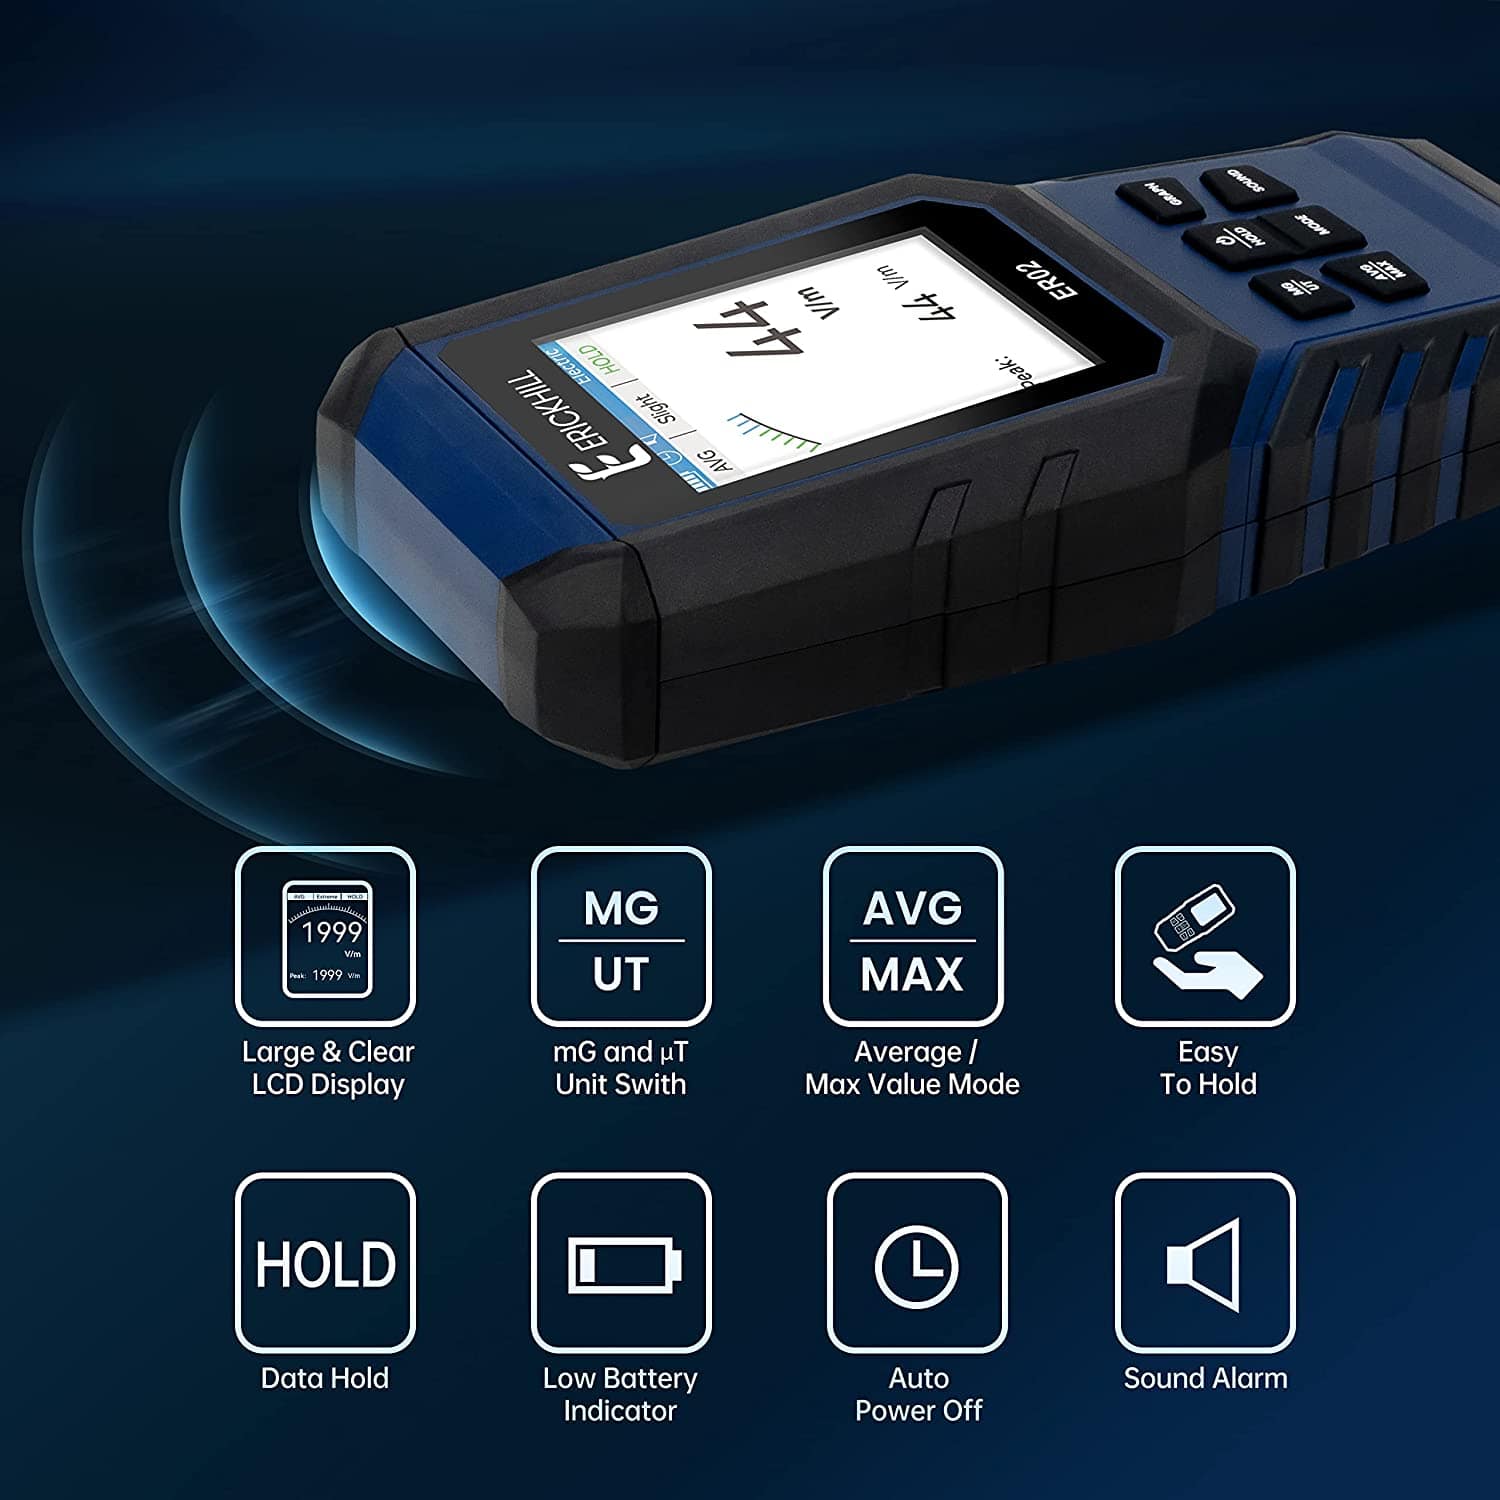 ERICKHILL Hand-held Rechargeable 3 in 1 Digital LCD EMF Detector - ExtremeMeters.com